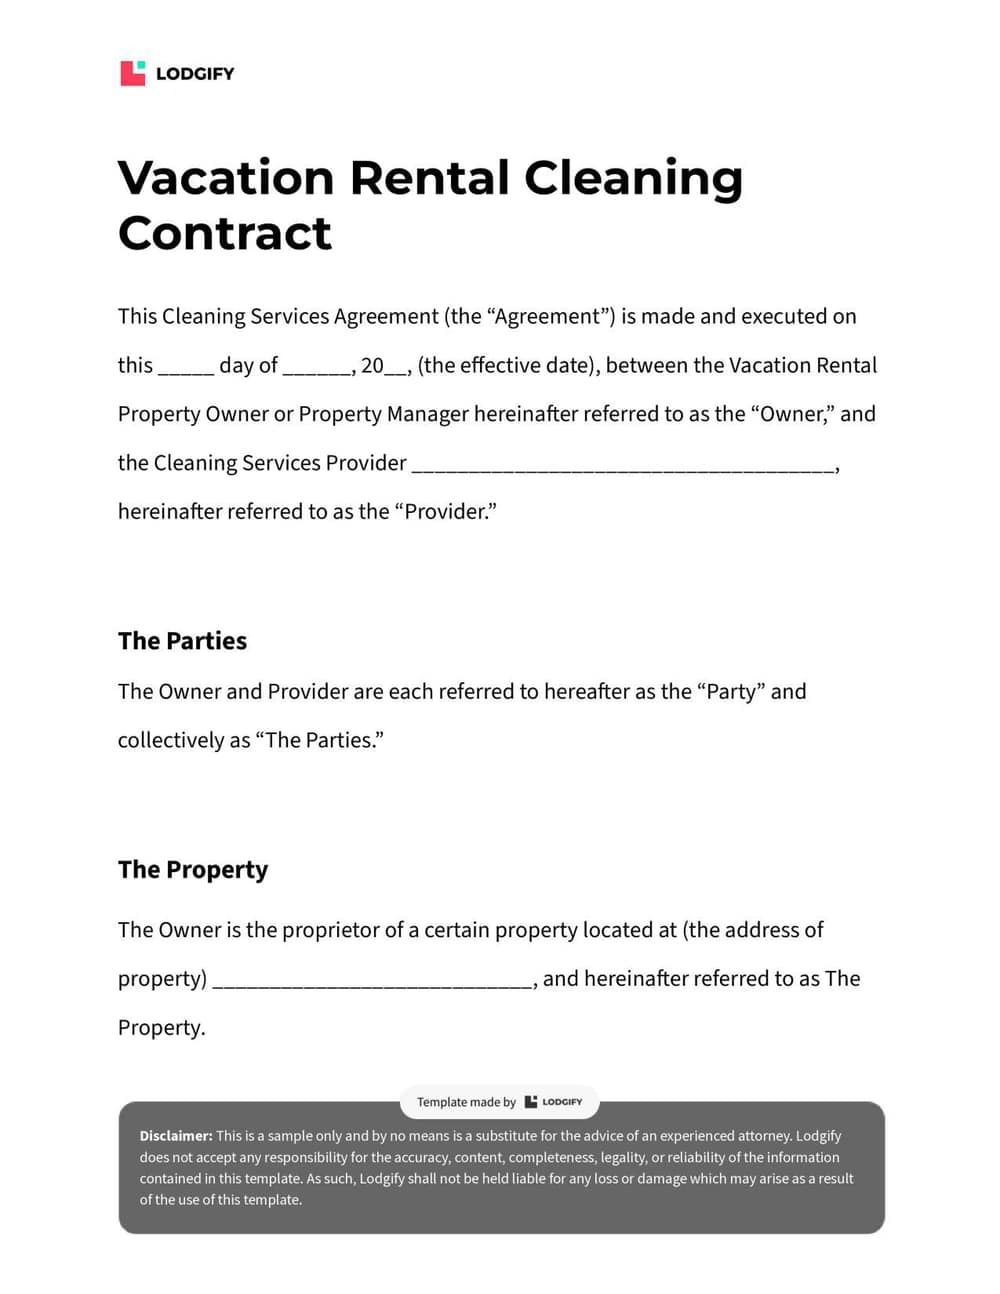 Vacation Rental Cleaning Contract Template